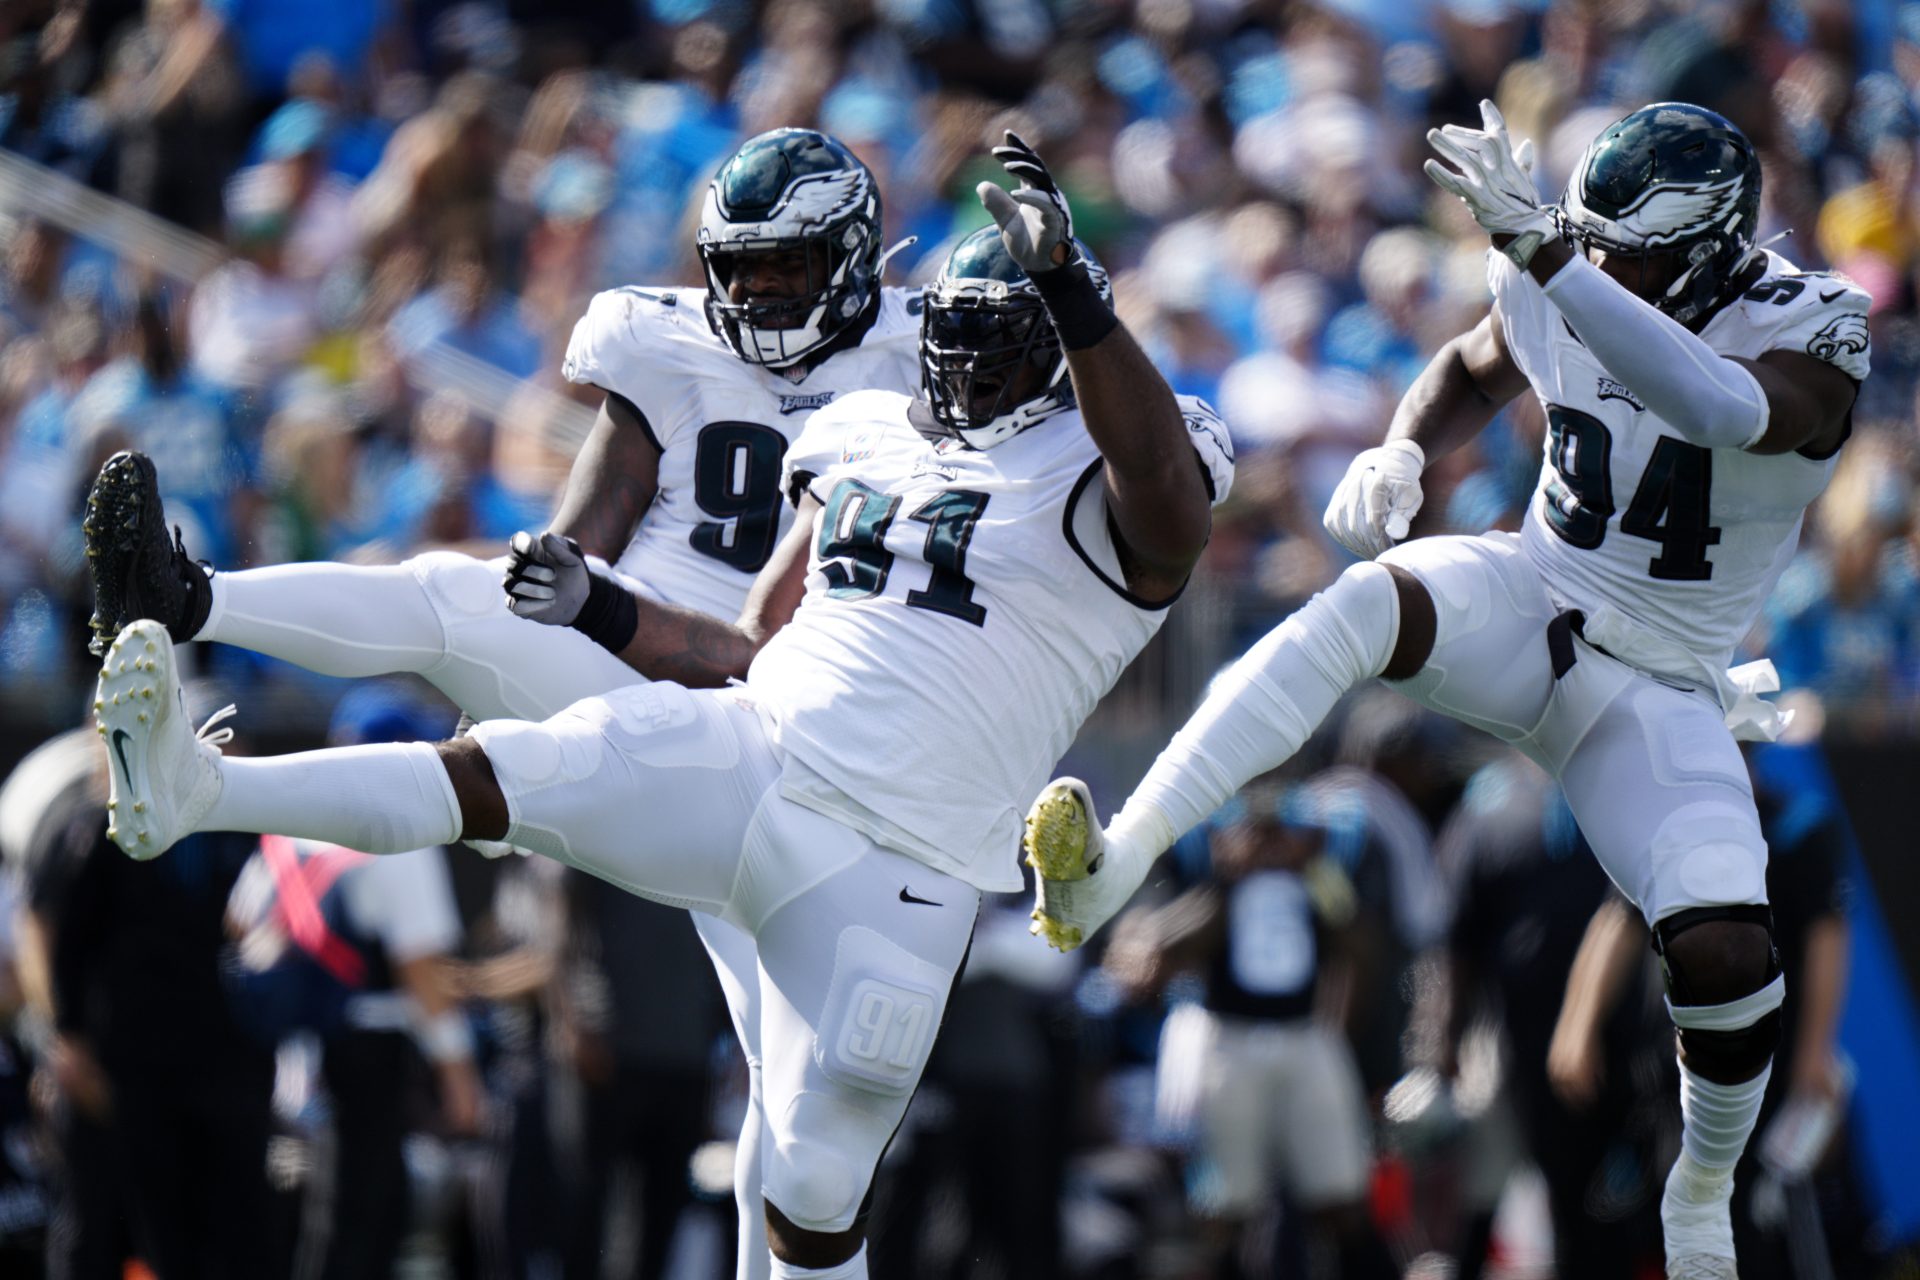 Philadelphia Eagles defensive tackle Fletcher Cox celebrates after a sack against the Carolina Panthers during the second half of an NFL football game Sunday, Oct. 10, 2021, in Charlotte, N.C.